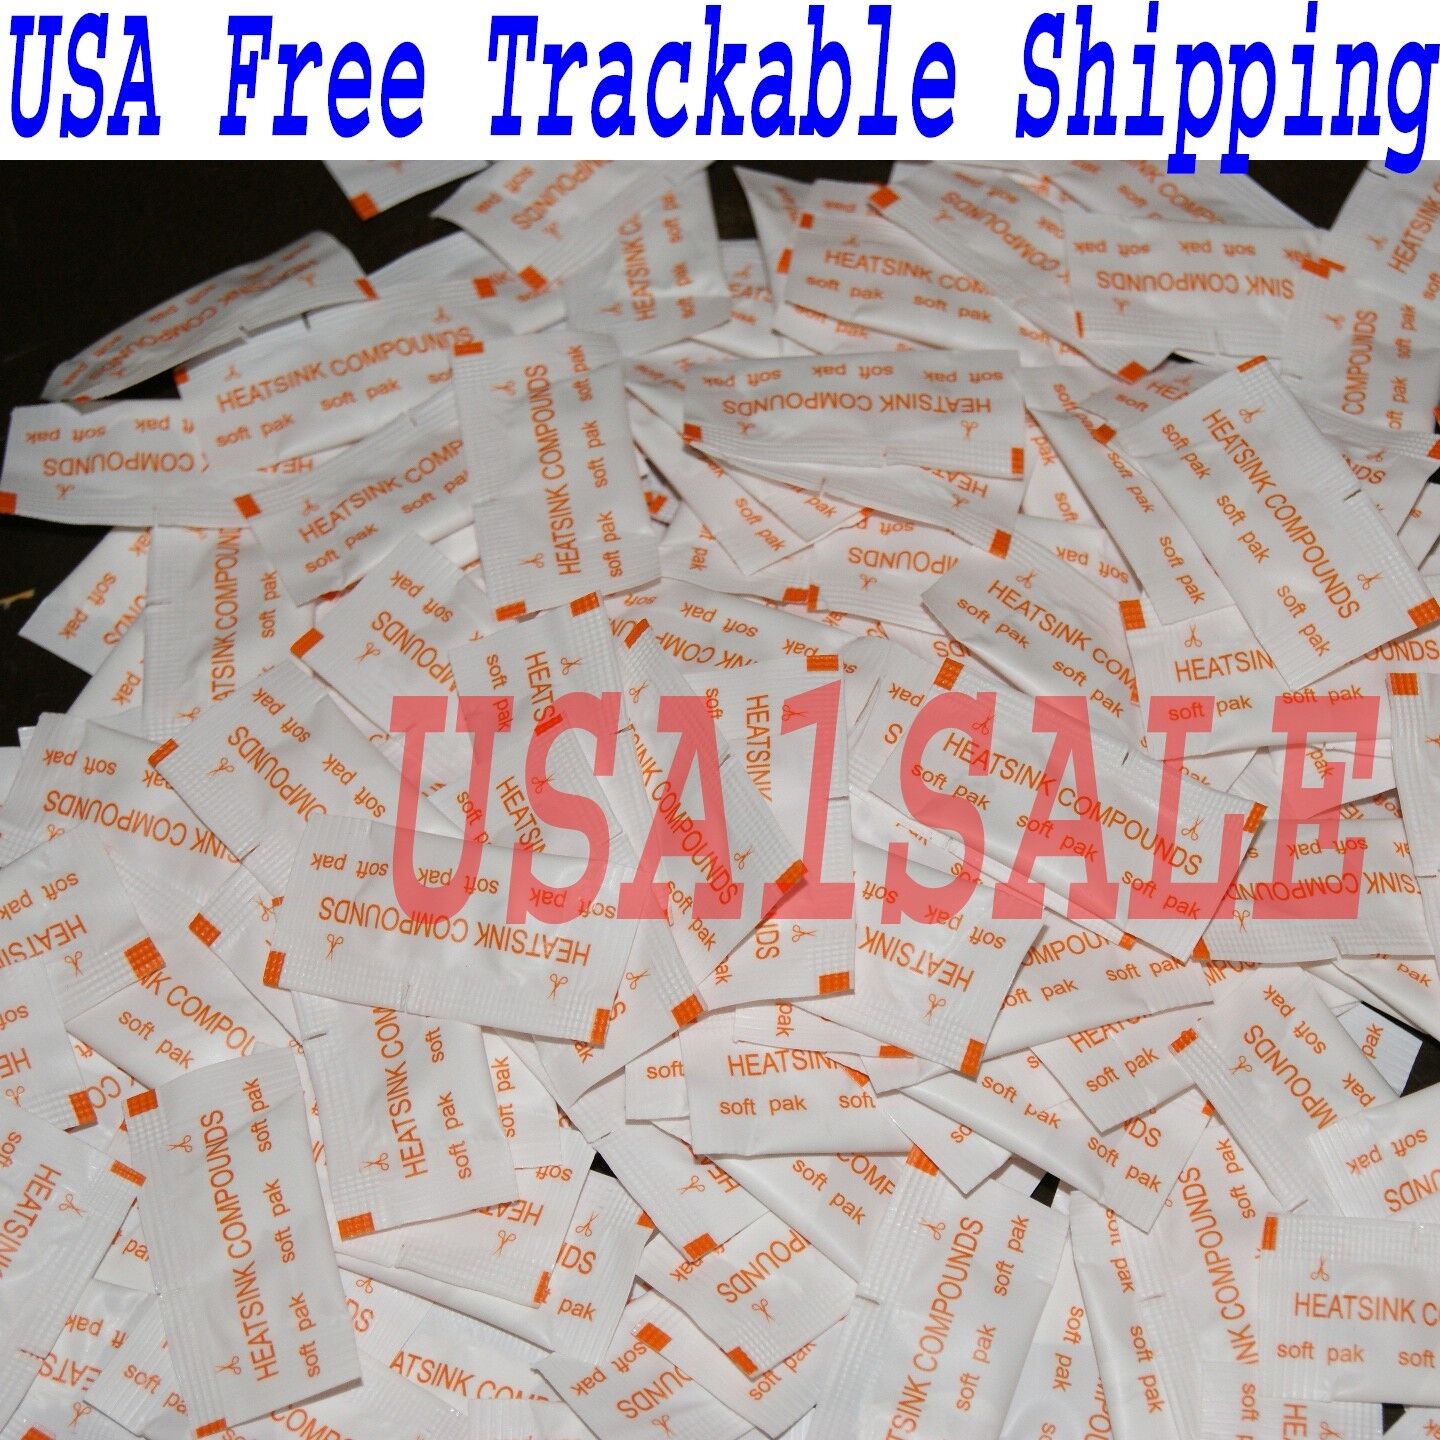 Wholesale Lot of 200 pcs White Heatsink Compounds Thermal Paste Grease G Value √ Stars Does Not Apply